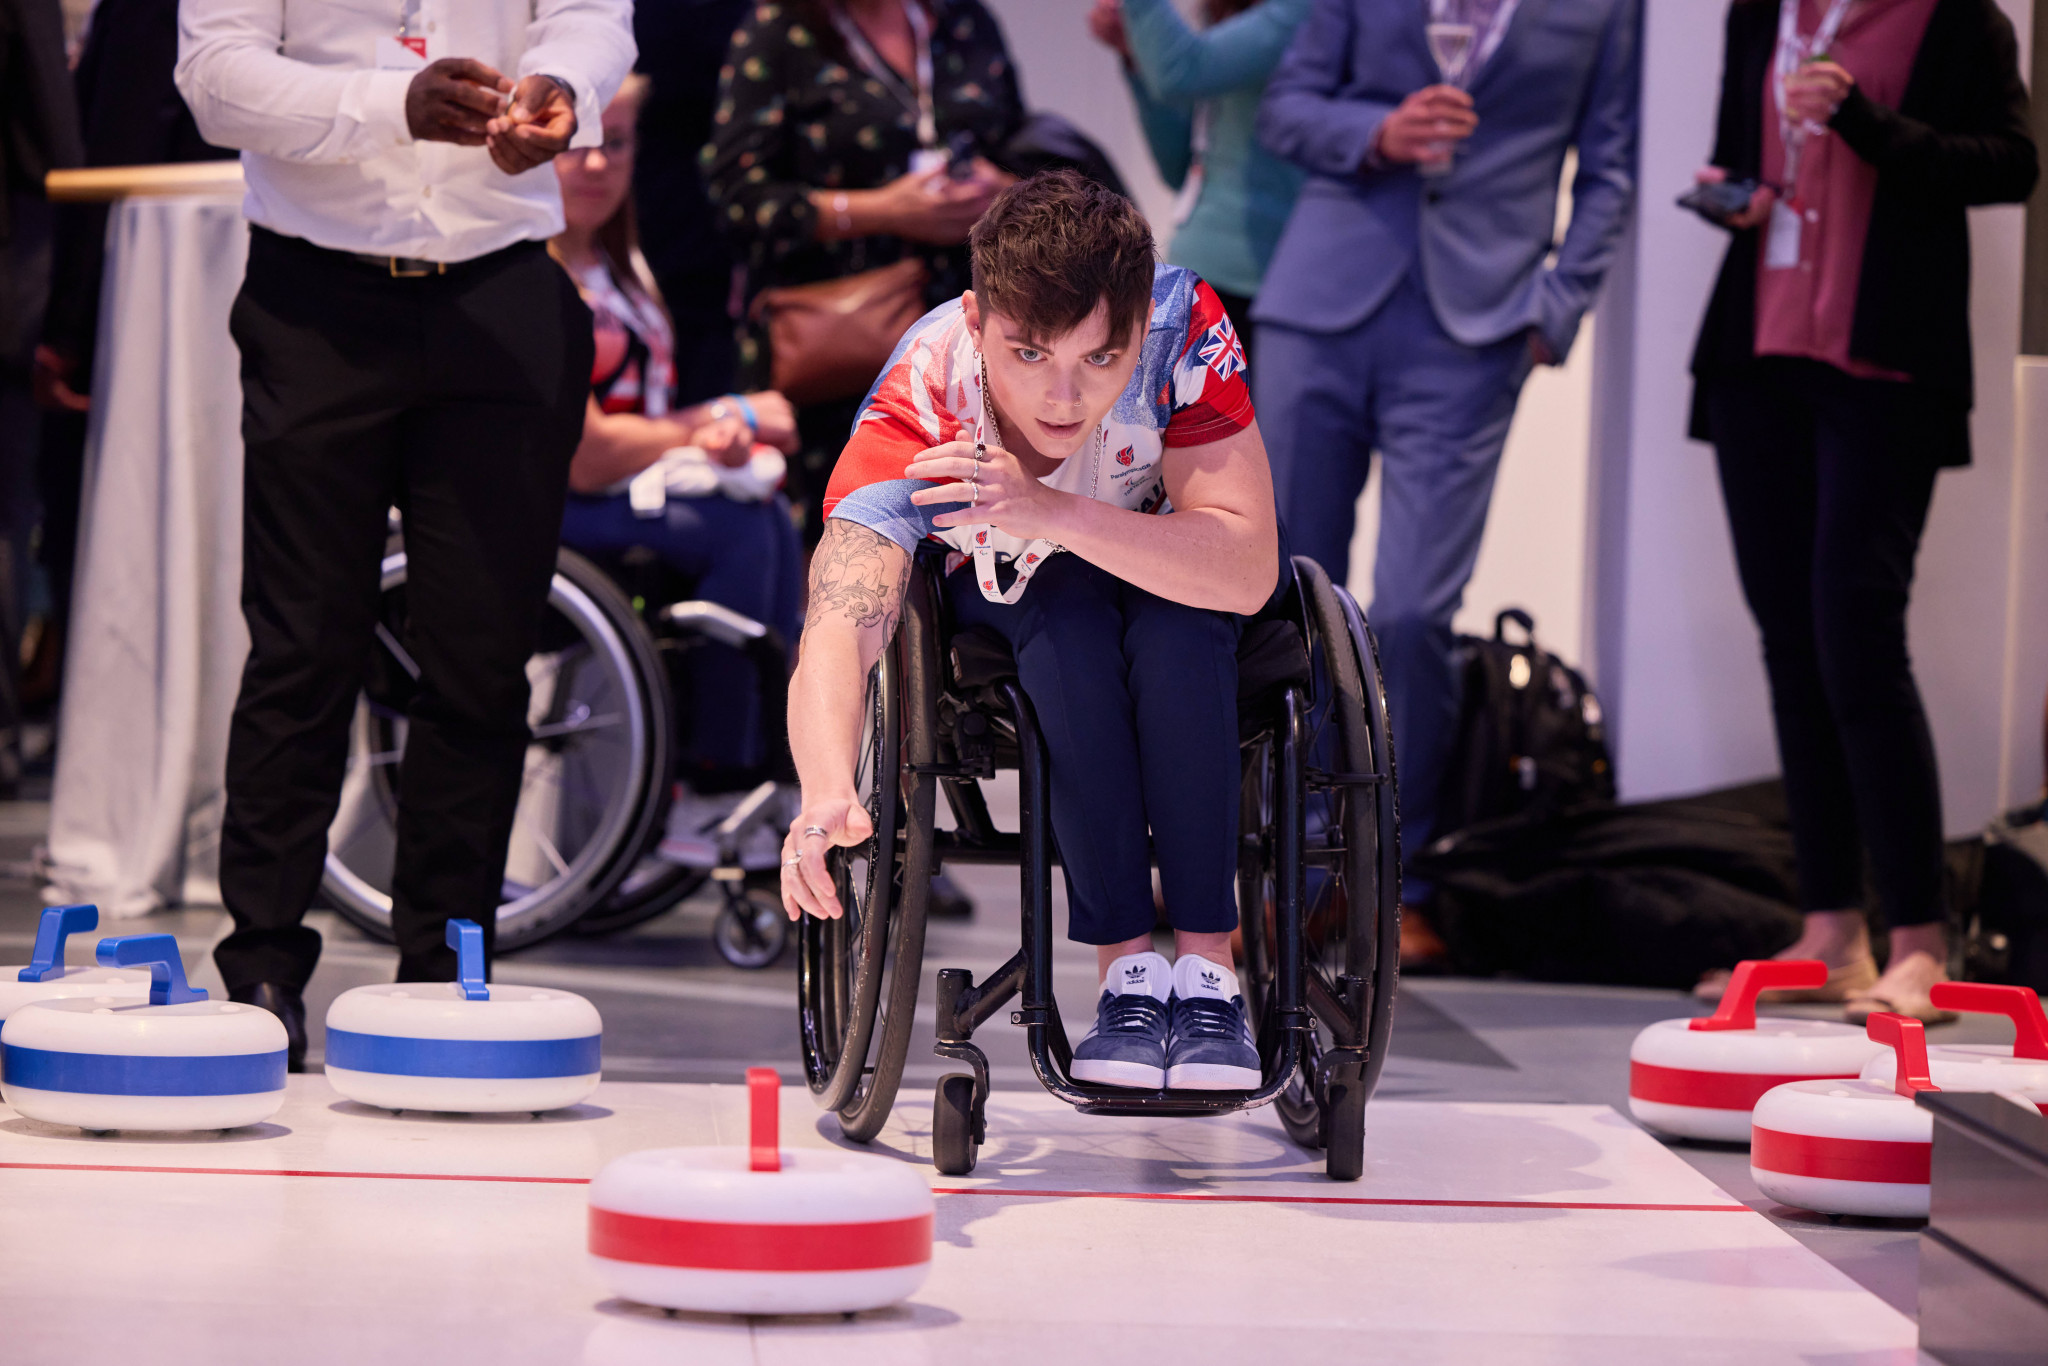 Lauren Rowles, who was one of the Paralympians to attend the charity event, played in a curling activity ©Sir Robert McAlpine 